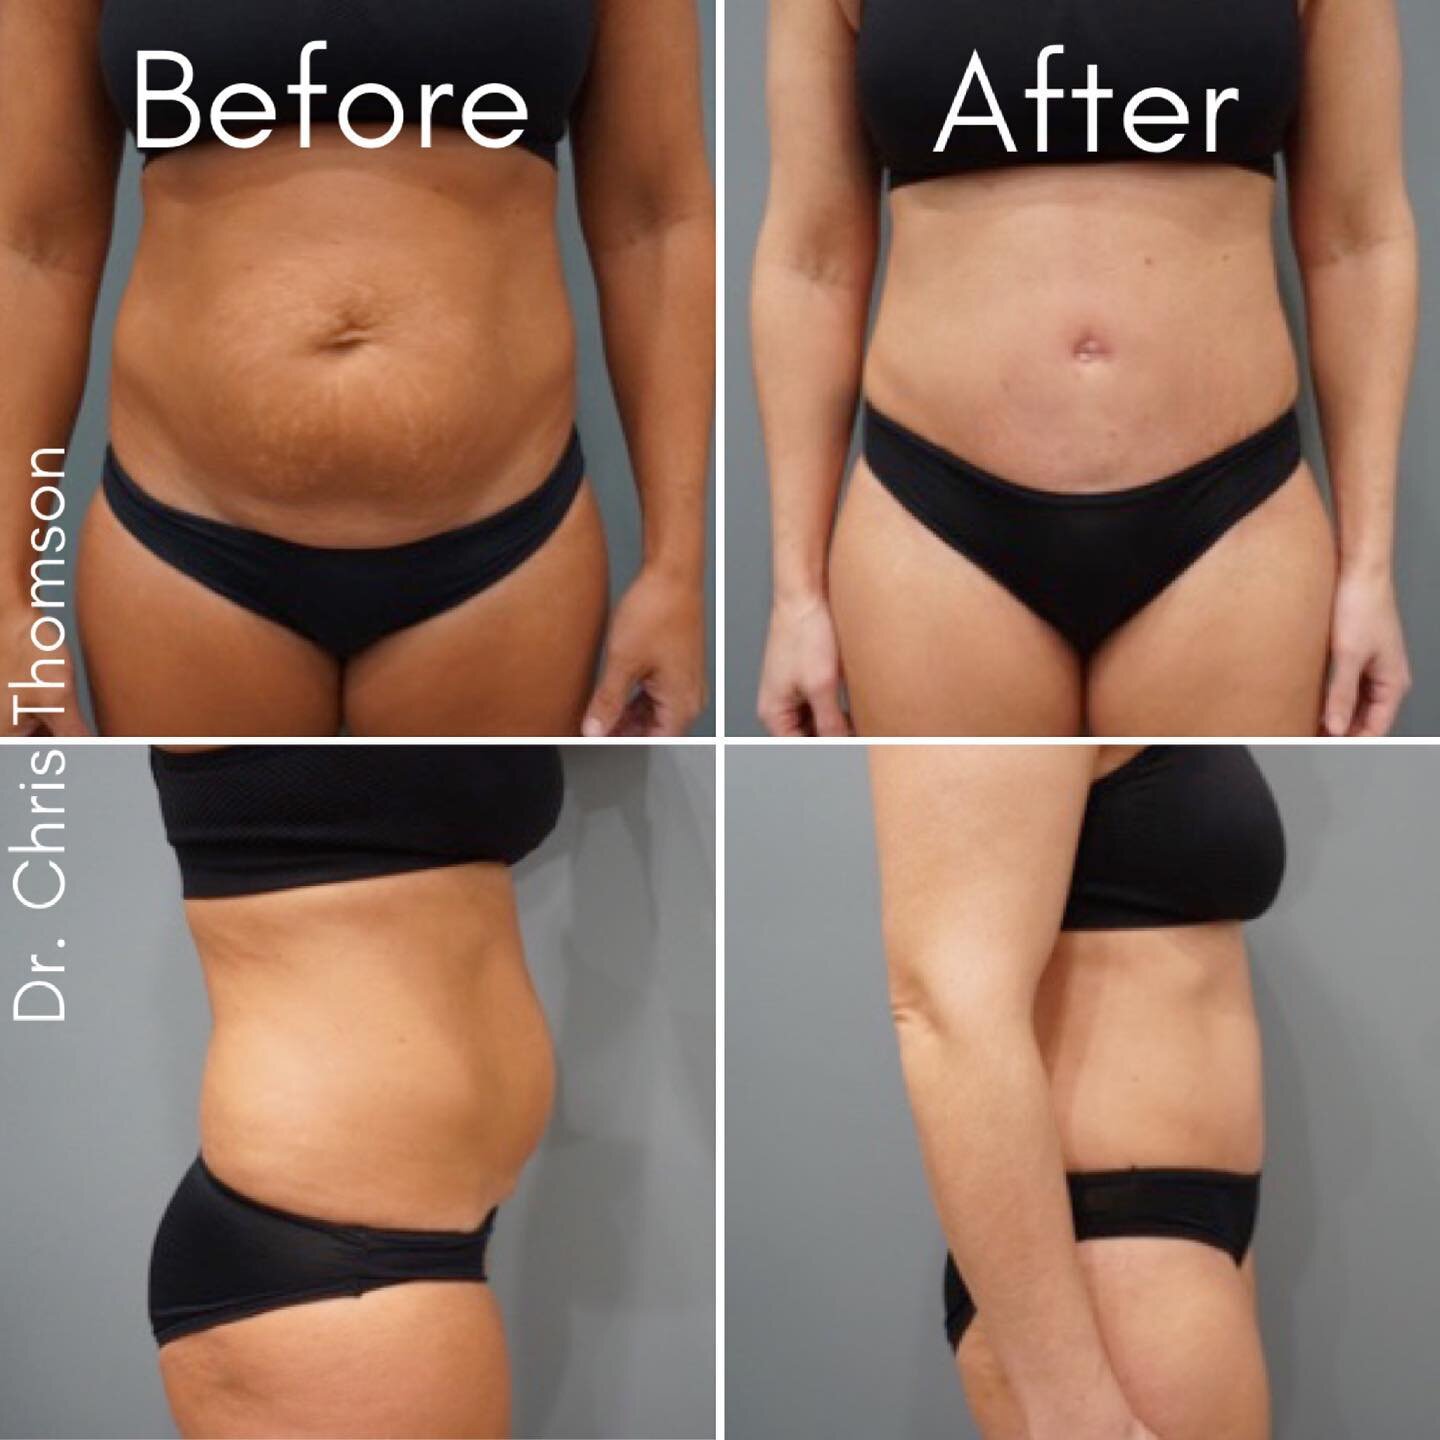 Before and After 🌸 tummy tuck. ⁣
⁣⁣
⁣⁣
⁣⁣
⁣⁣
⁣⁣
⁣#tummytuck #plasticsurgery #drchristhomson #beforeandafter #reveal #glowup